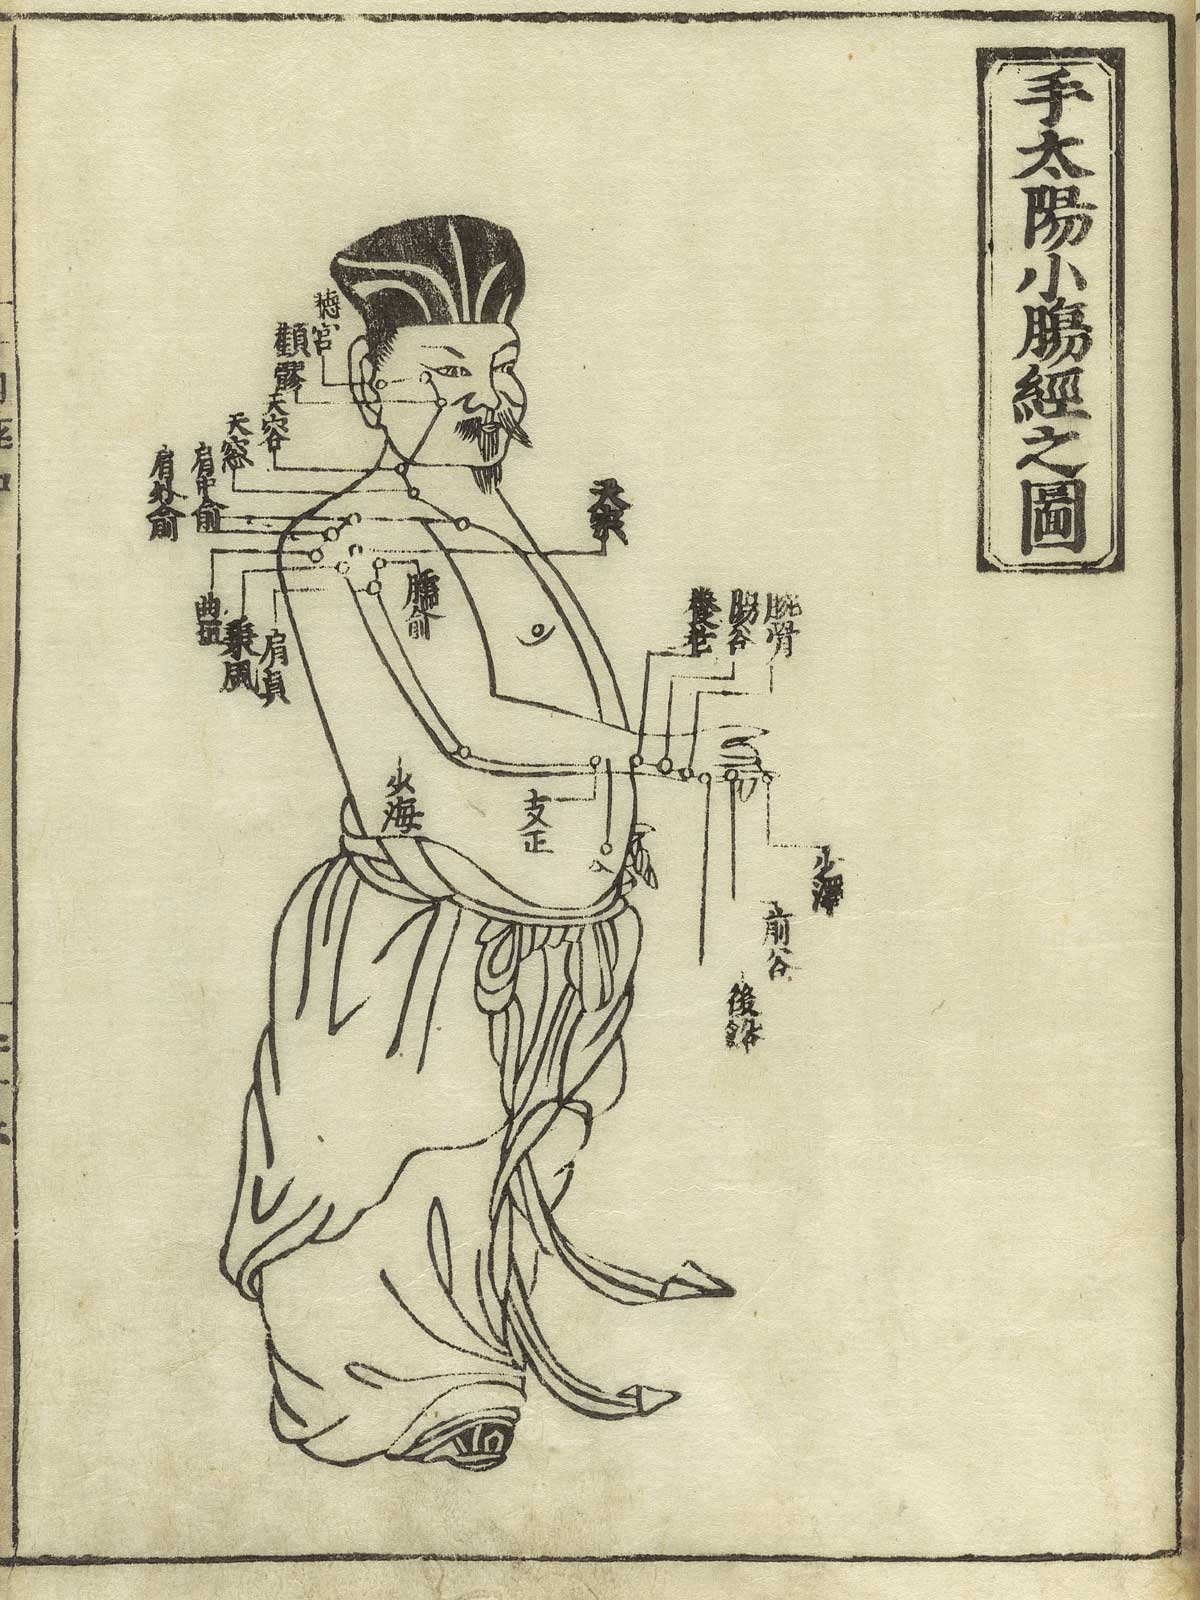 Woodcut showing the Taiyang small intestine meridian of hand of a standing male facing figure wearing a loin cloth with meridians indicated down the arm and chest with Chinese characters giving names of the points, from Hua Shou’s Jushikei hakki, NLM Call no.: WZ 260 H868s 1716.